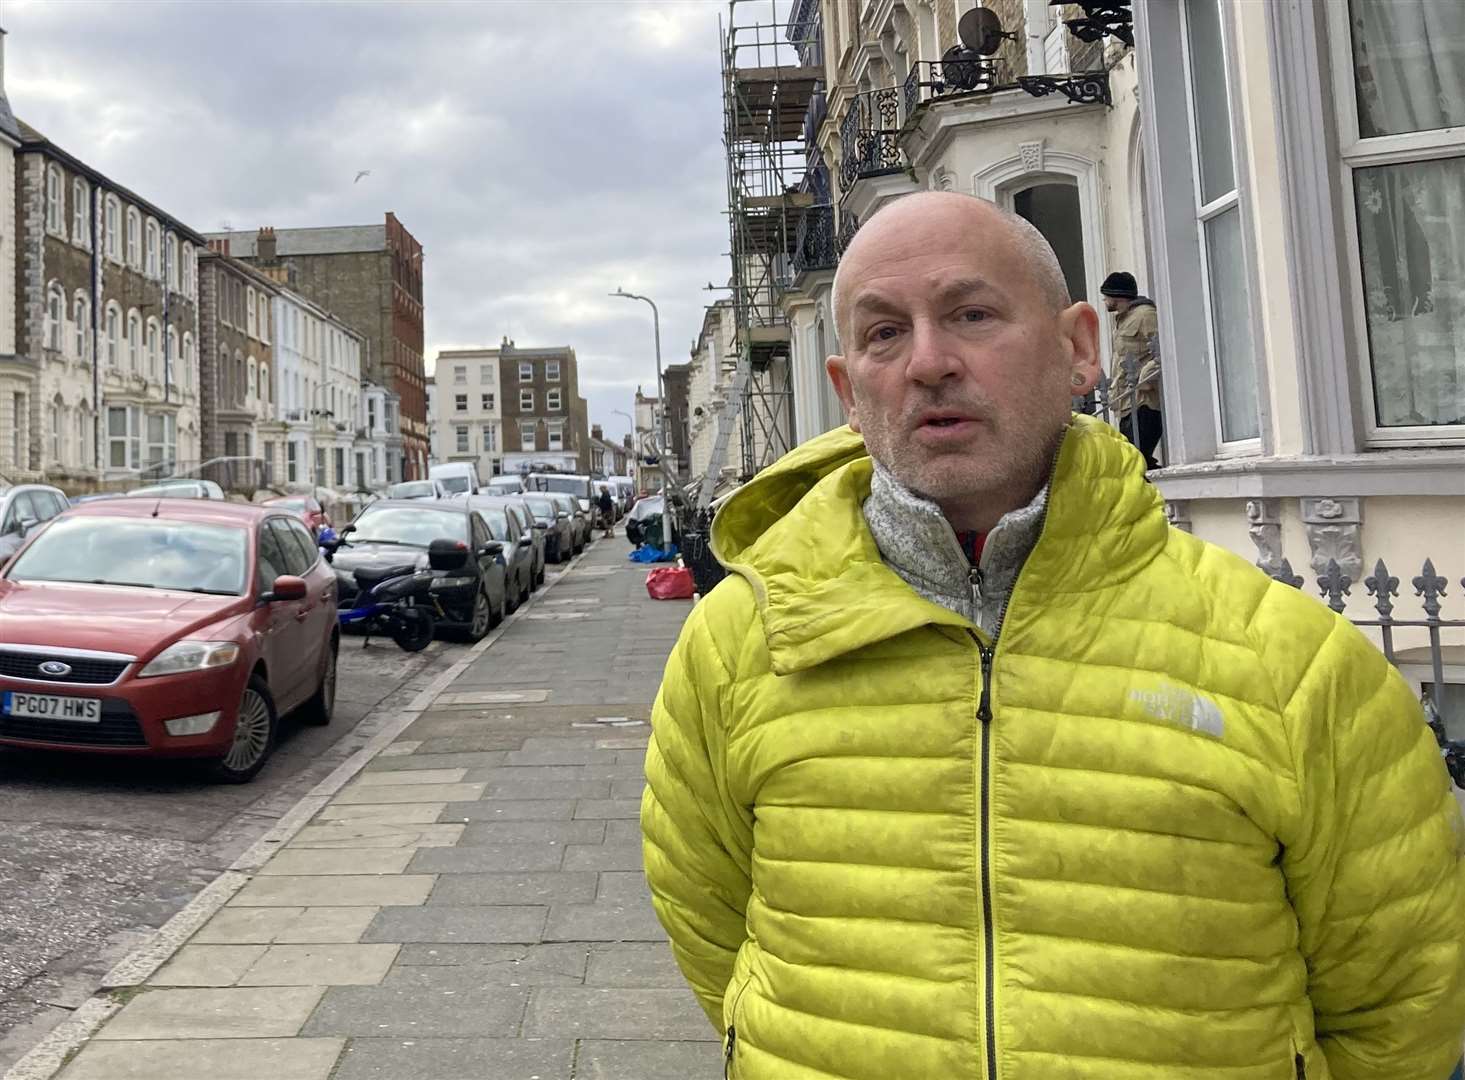 Margate resident Matt Shoul has long been campaigning for the PSPO